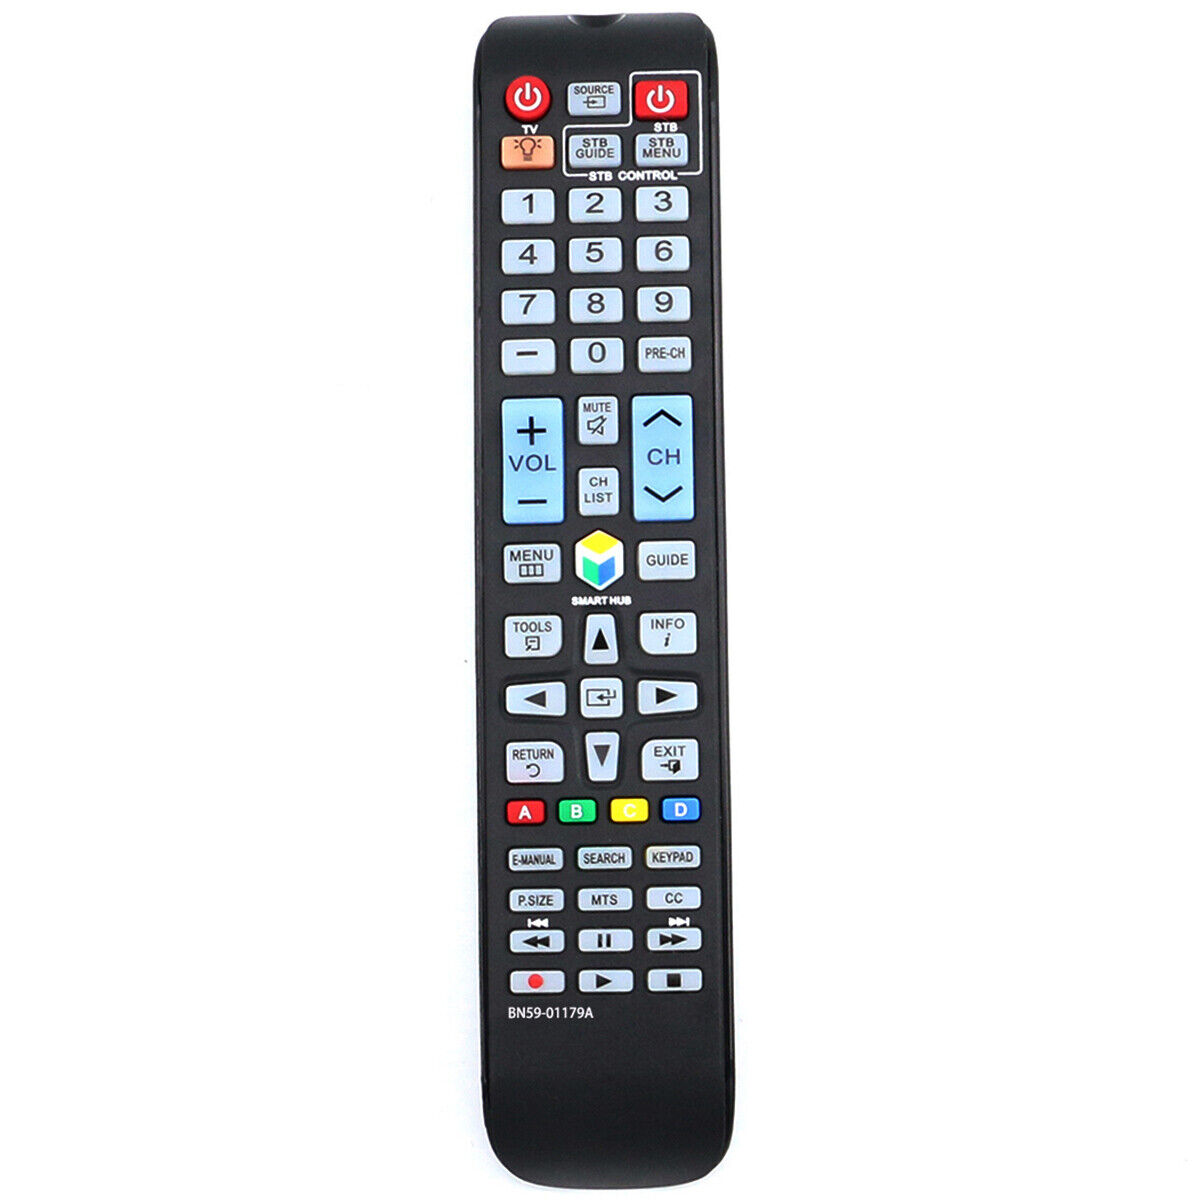 US BN59-01179A New Replacement Remote Control For SAMSUNG LCD LED Smart TV Unbranded BN59-01179A - фотография #2